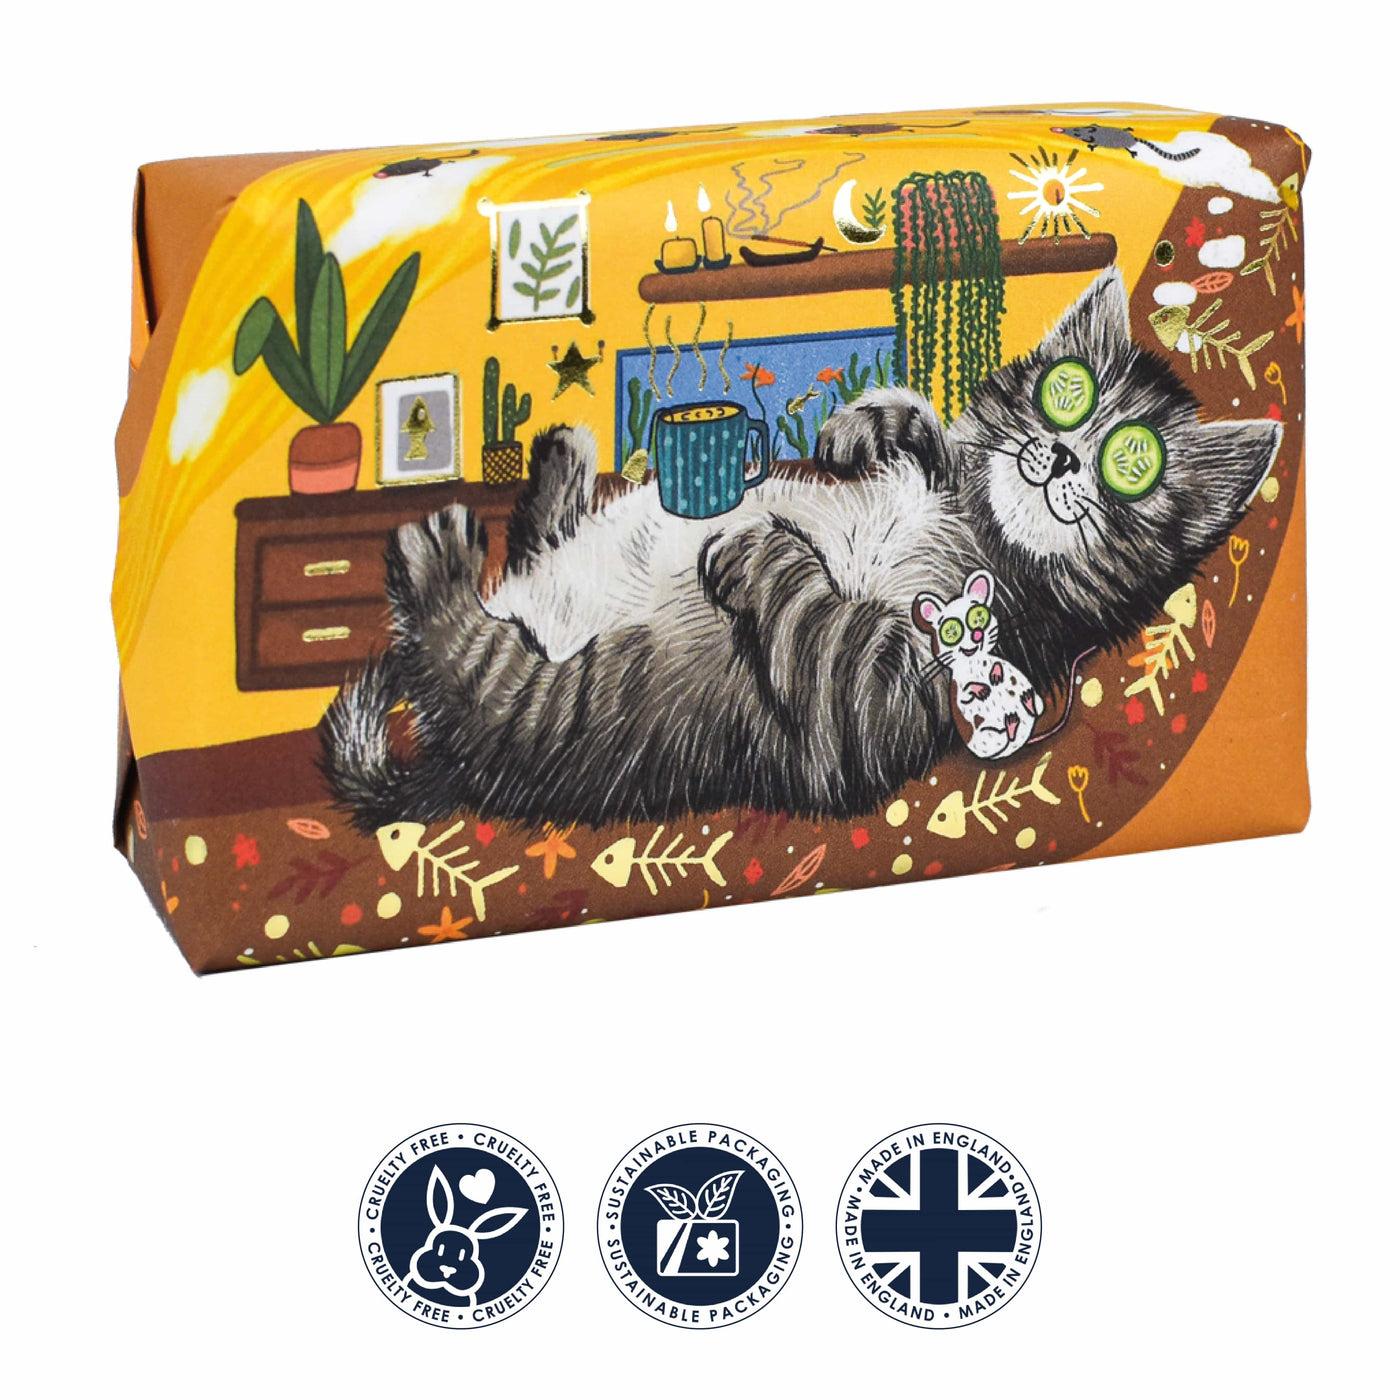 Wonderful Animals Cat Soap Bar from our Luxury Bar Soap collection by The English Soap Company